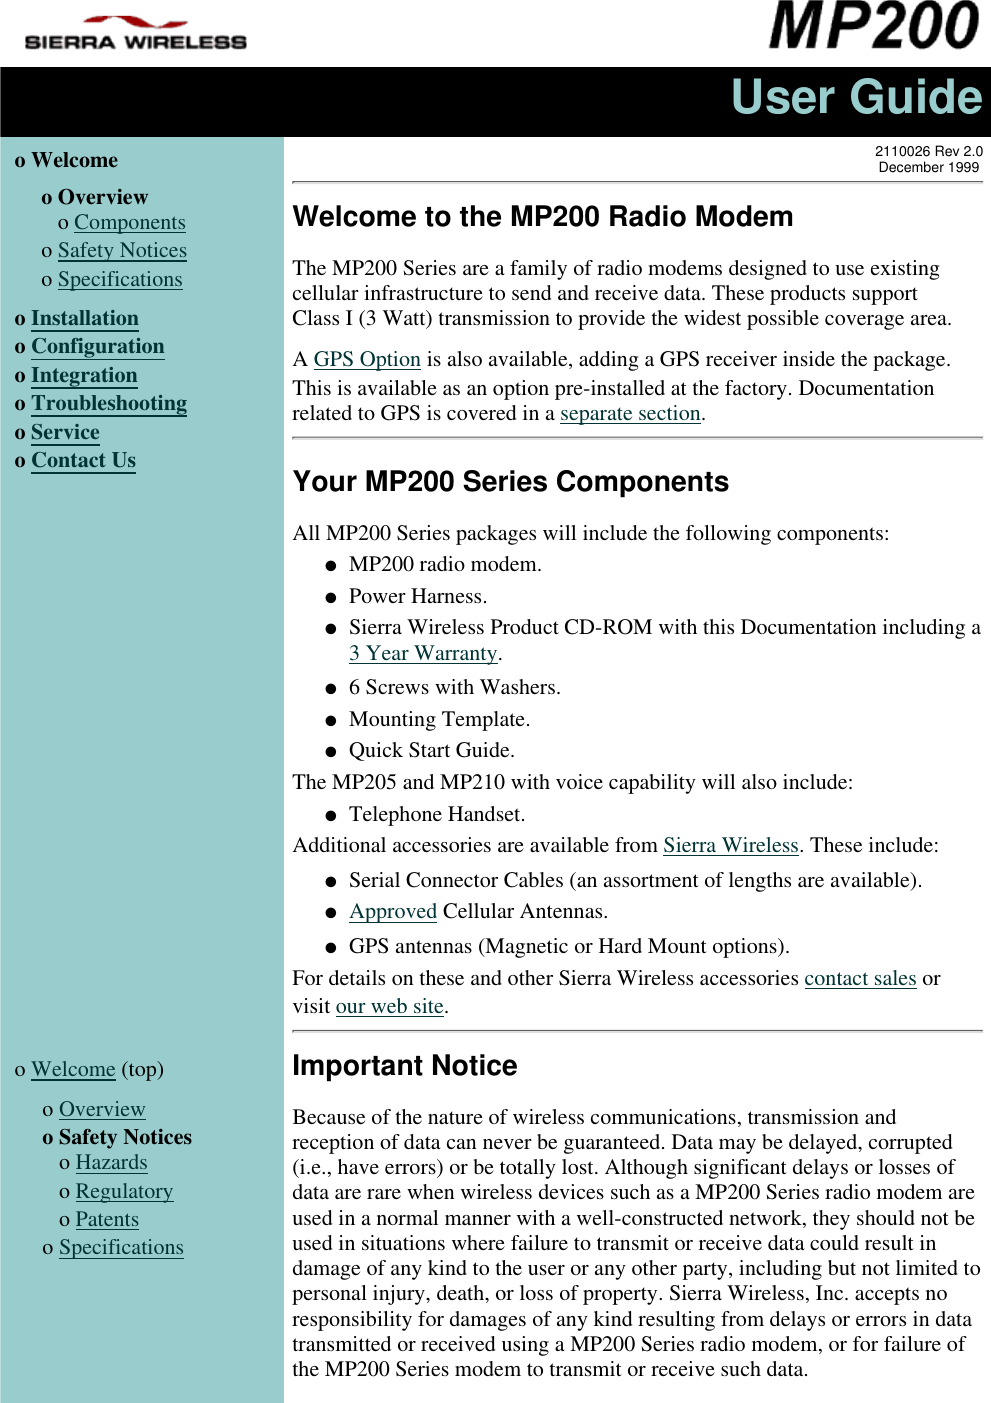 User Guideo Welcome  o Overview   o Componentso Safety Noticeso Specificationso Installationo Configurationo Integrationo Troubleshootingo Serviceo Contact Us2110026 Rev 2.0December 1999Welcome to the MP200 Radio ModemThe MP200 Series are a family of radio modems designed to use existingcellular infrastructure to send and receive data. These products supportClass I (3 Watt) transmission to provide the widest possible coverage area.A GPS Option is also available, adding a GPS receiver inside the package.This is available as an option pre-installed at the factory. Documentationrelated to GPS is covered in a separate section.Your MP200 Series ComponentsAll MP200 Series packages will include the following components:MP200 radio modem.●   Power Harness.●   Sierra Wireless Product CD-ROM with this Documentation including a3 Year Warranty.●   6 Screws with Washers.●   Mounting Template.●   Quick Start Guide.●   The MP205 and MP210 with voice capability will also include:Telephone Handset.●   Additional accessories are available from Sierra Wireless. These include:Serial Connector Cables (an assortment of lengths are available).●   Approved Cellular Antennas.●   GPS antennas (Magnetic or Hard Mount options).●   For details on these and other Sierra Wireless accessories contact sales orvisit our web site.o Welcome (top)  o Overviewo Safety Notices   o Hazards   o Regulatory   o Patentso SpecificationsImportant NoticeBecause of the nature of wireless communications, transmission andreception of data can never be guaranteed. Data may be delayed, corrupted(i.e., have errors) or be totally lost. Although significant delays or losses ofdata are rare when wireless devices such as a MP200 Series radio modem areused in a normal manner with a well-constructed network, they should not beused in situations where failure to transmit or receive data could result indamage of any kind to the user or any other party, including but not limited topersonal injury, death, or loss of property. Sierra Wireless, Inc. accepts noresponsibility for damages of any kind resulting from delays or errors in datatransmitted or received using a MP200 Series radio modem, or for failure ofthe MP200 Series modem to transmit or receive such data.  